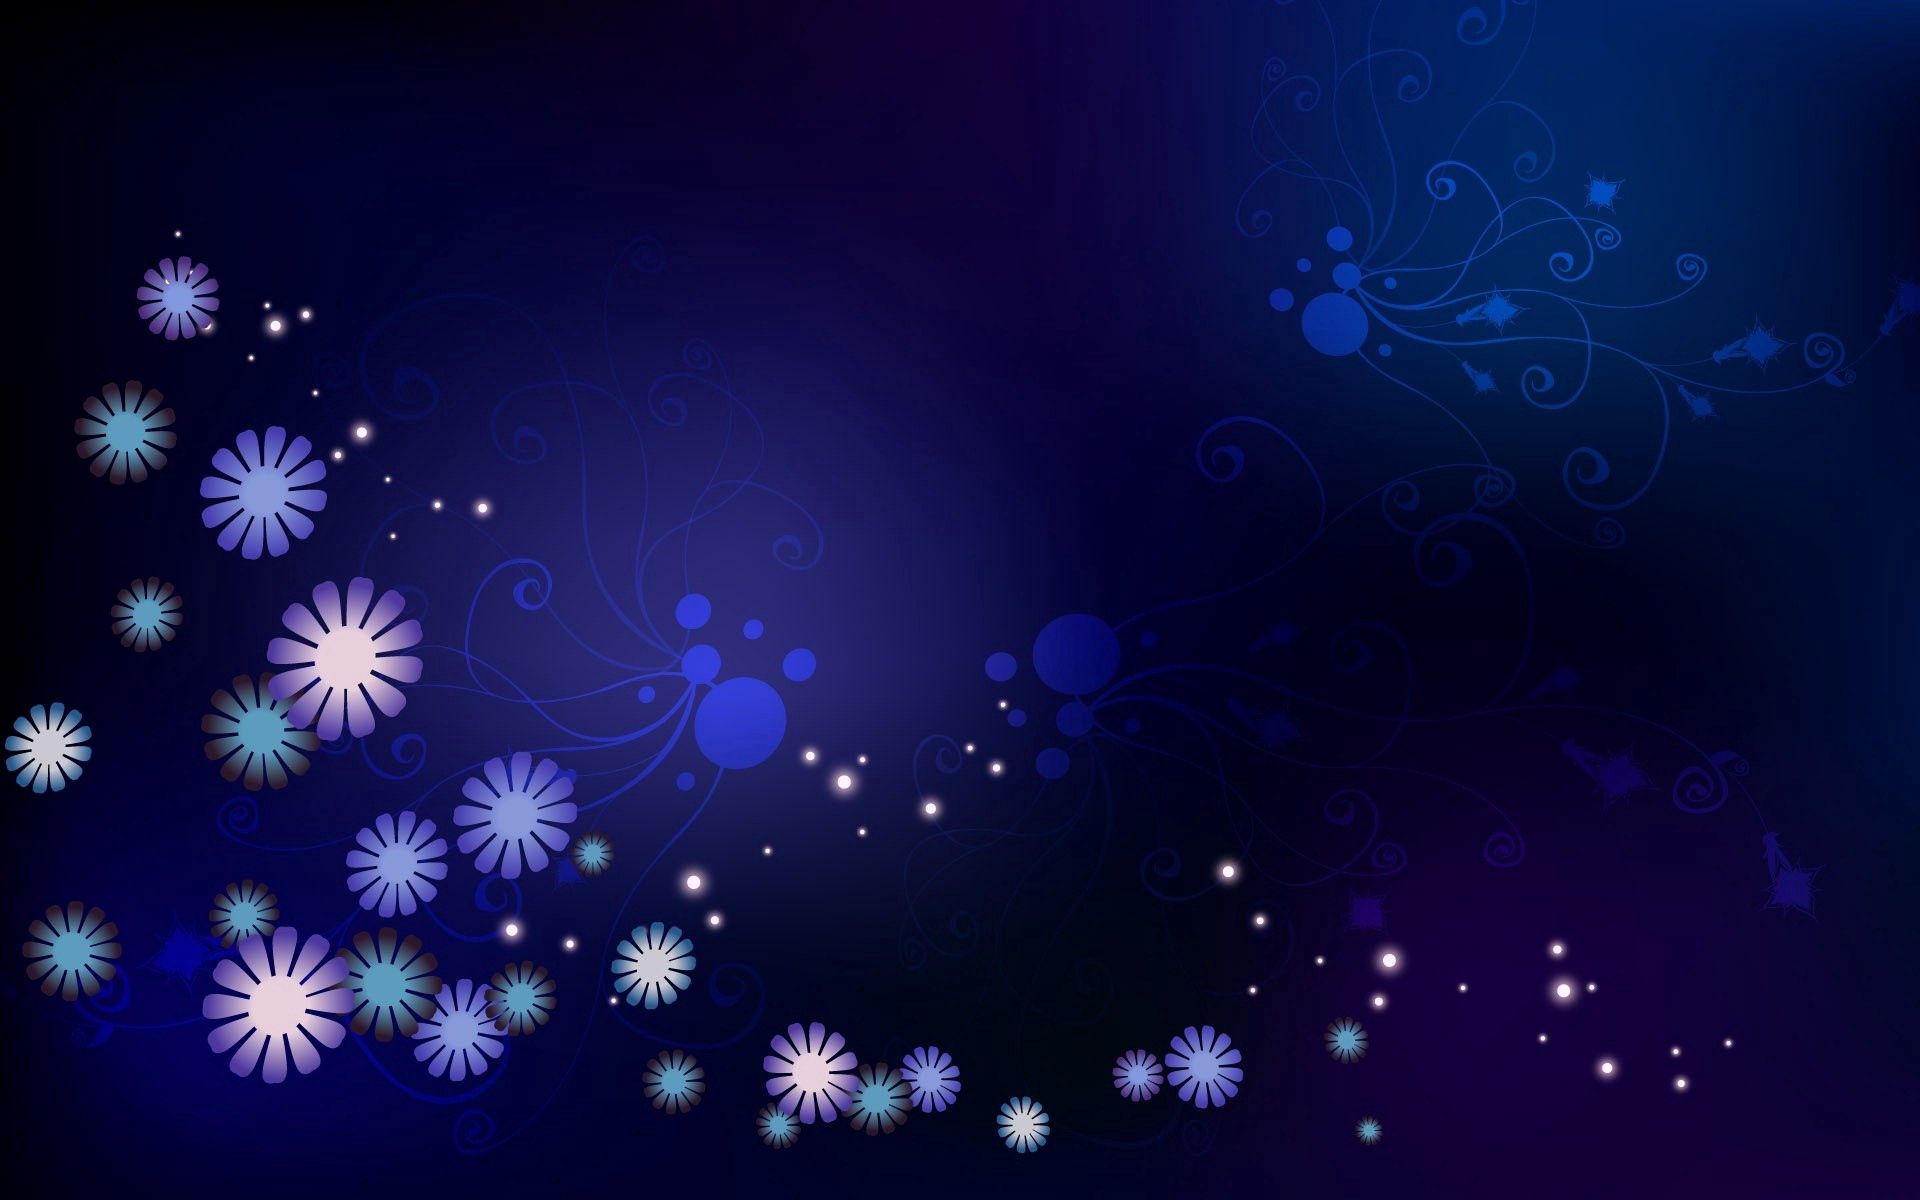 point, color, flowers, points, abstract, background, stars, circles, shine, light wallpaper for mobile